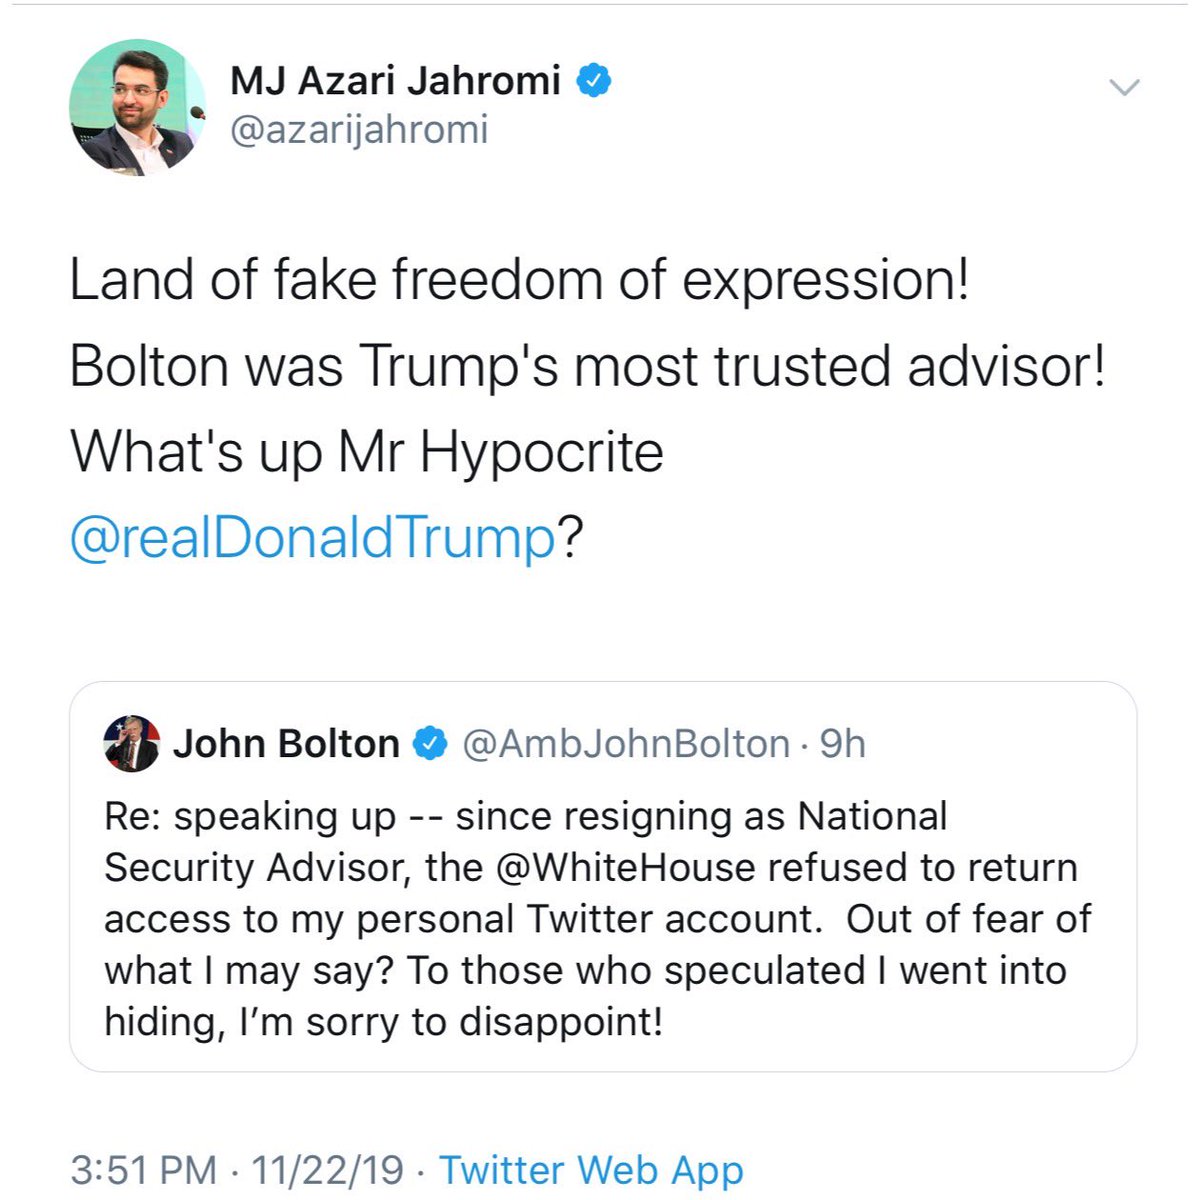 21. Now look at how Jahromi responds to the whole John Bolton Twitter drama. As if Bolton not getting access to his Twitter account (he could have setup a new one) is the same as Iran shutting down the internet and blocking Twitter for hers  @azarijahromi is a disgrace